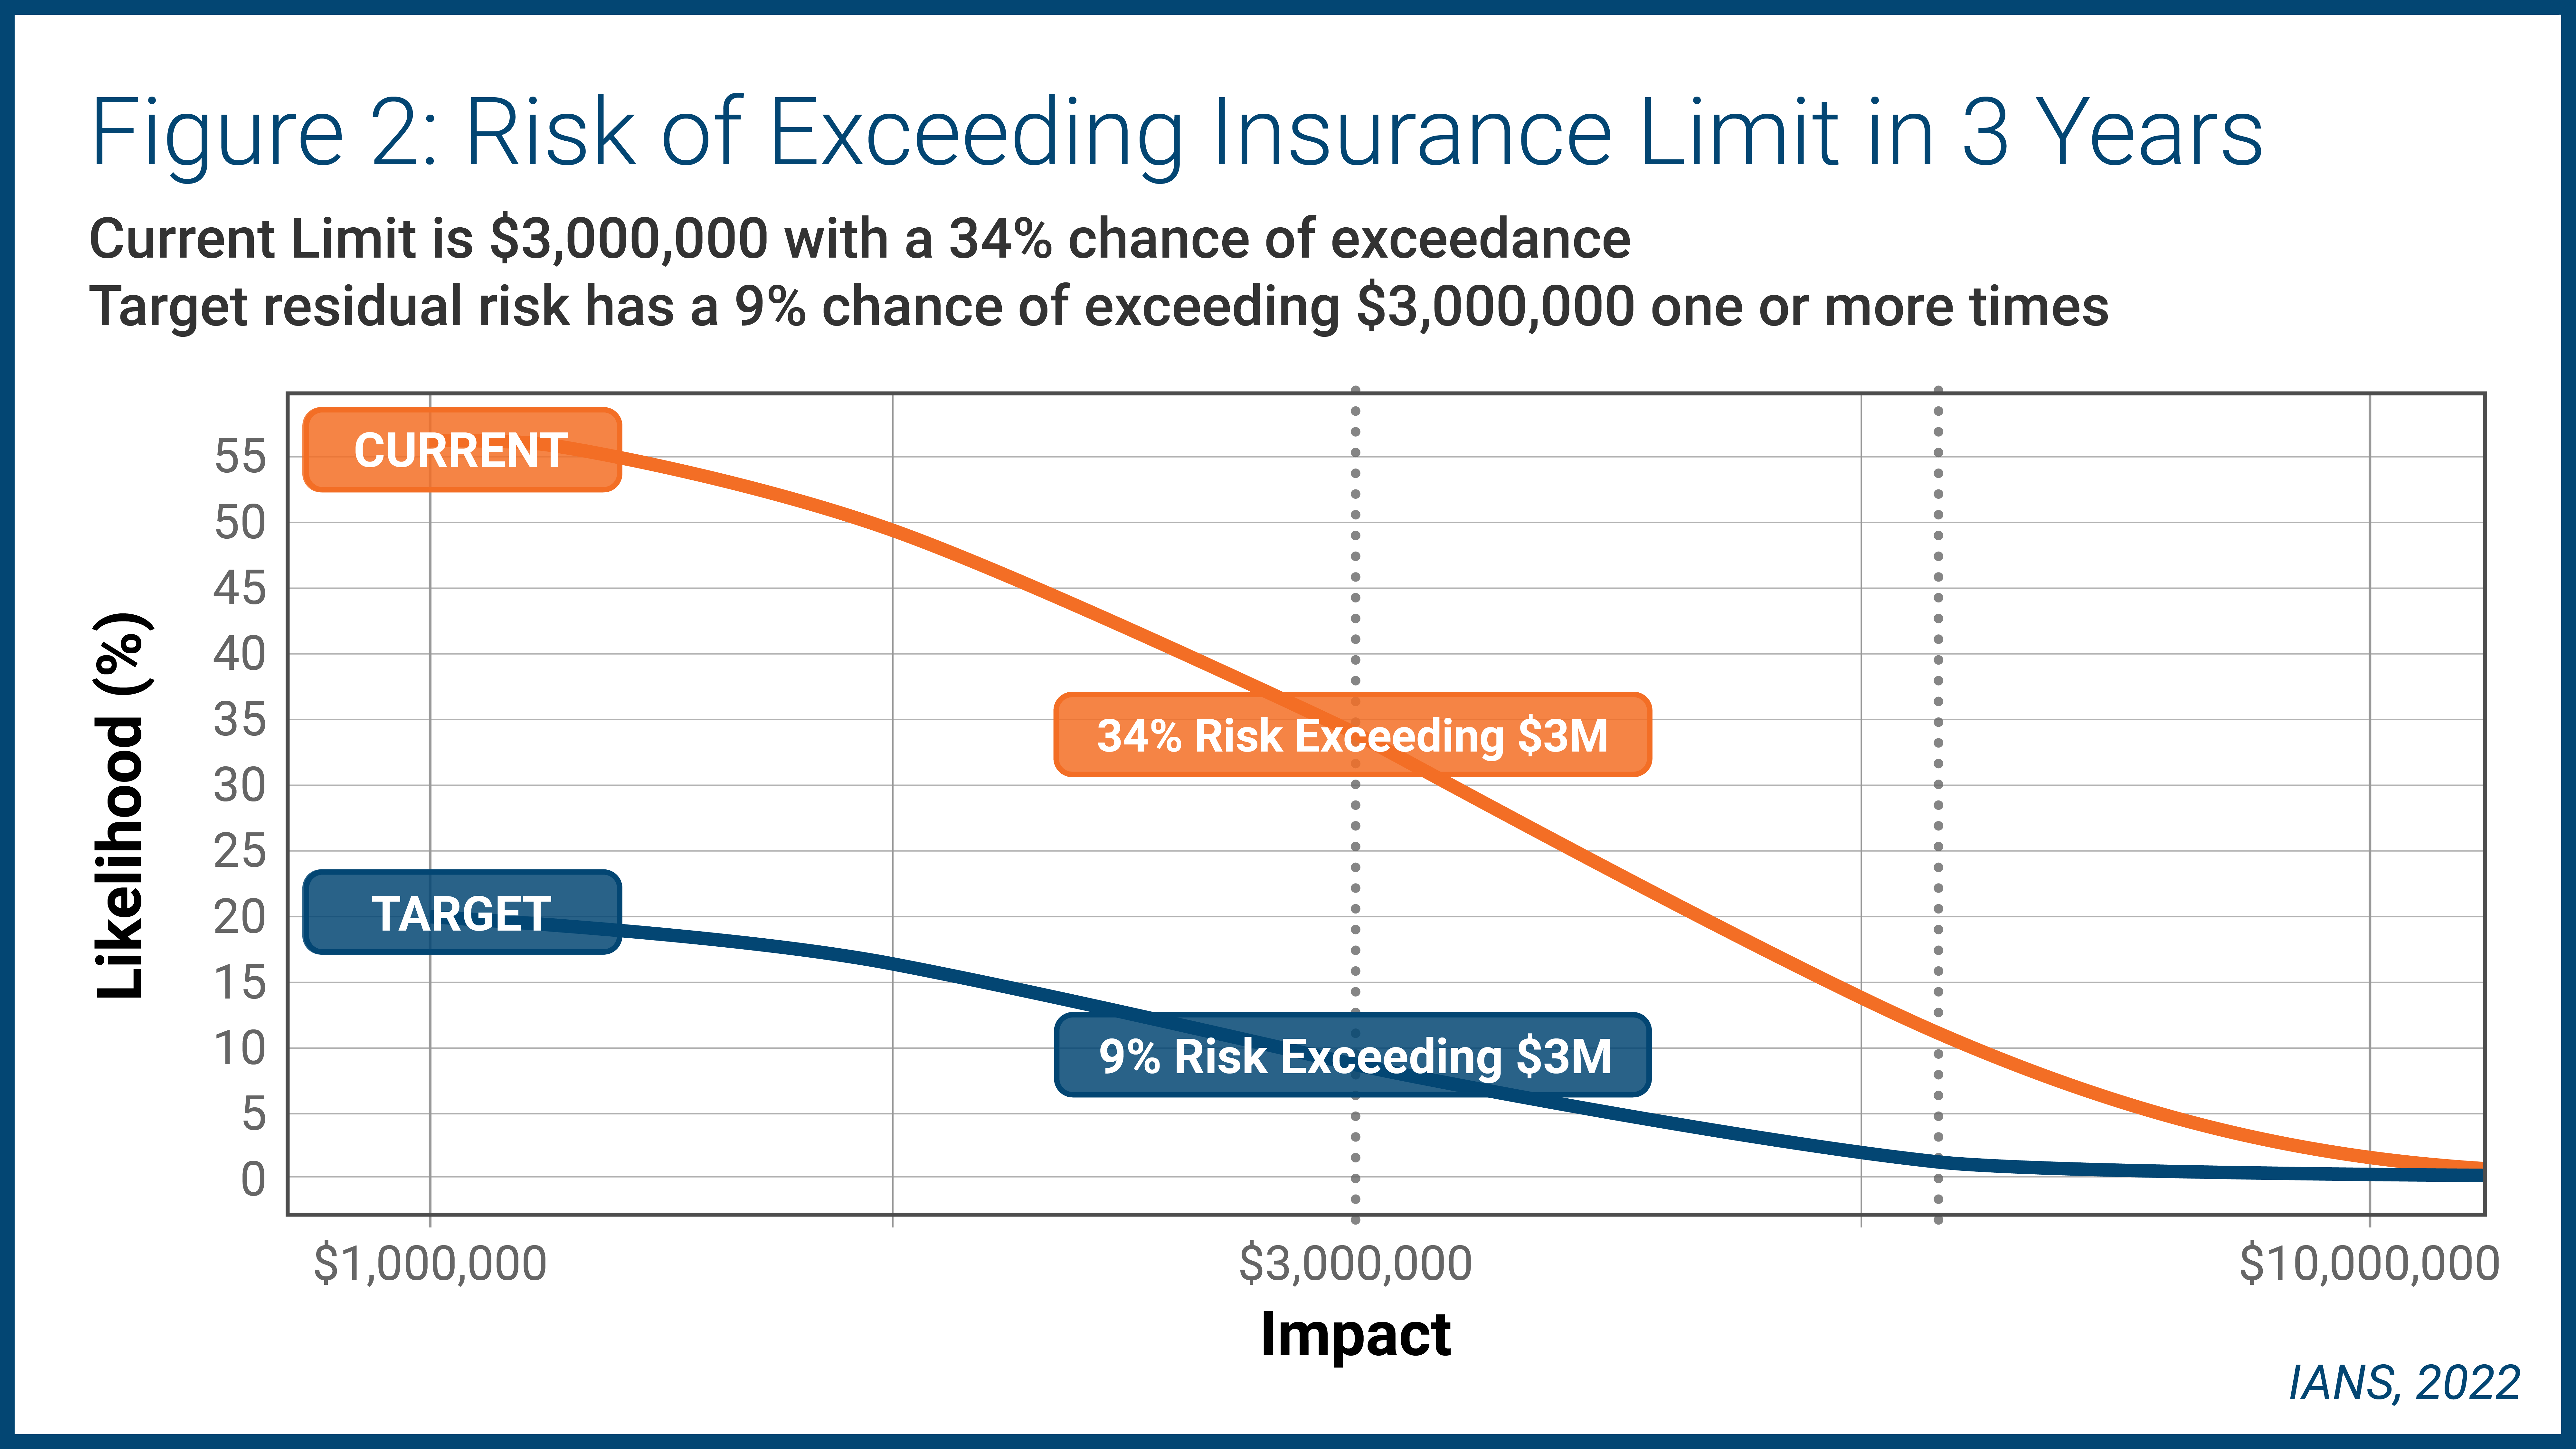 Graph showing Risk of Exceeding Insurance Limit in 3 Years